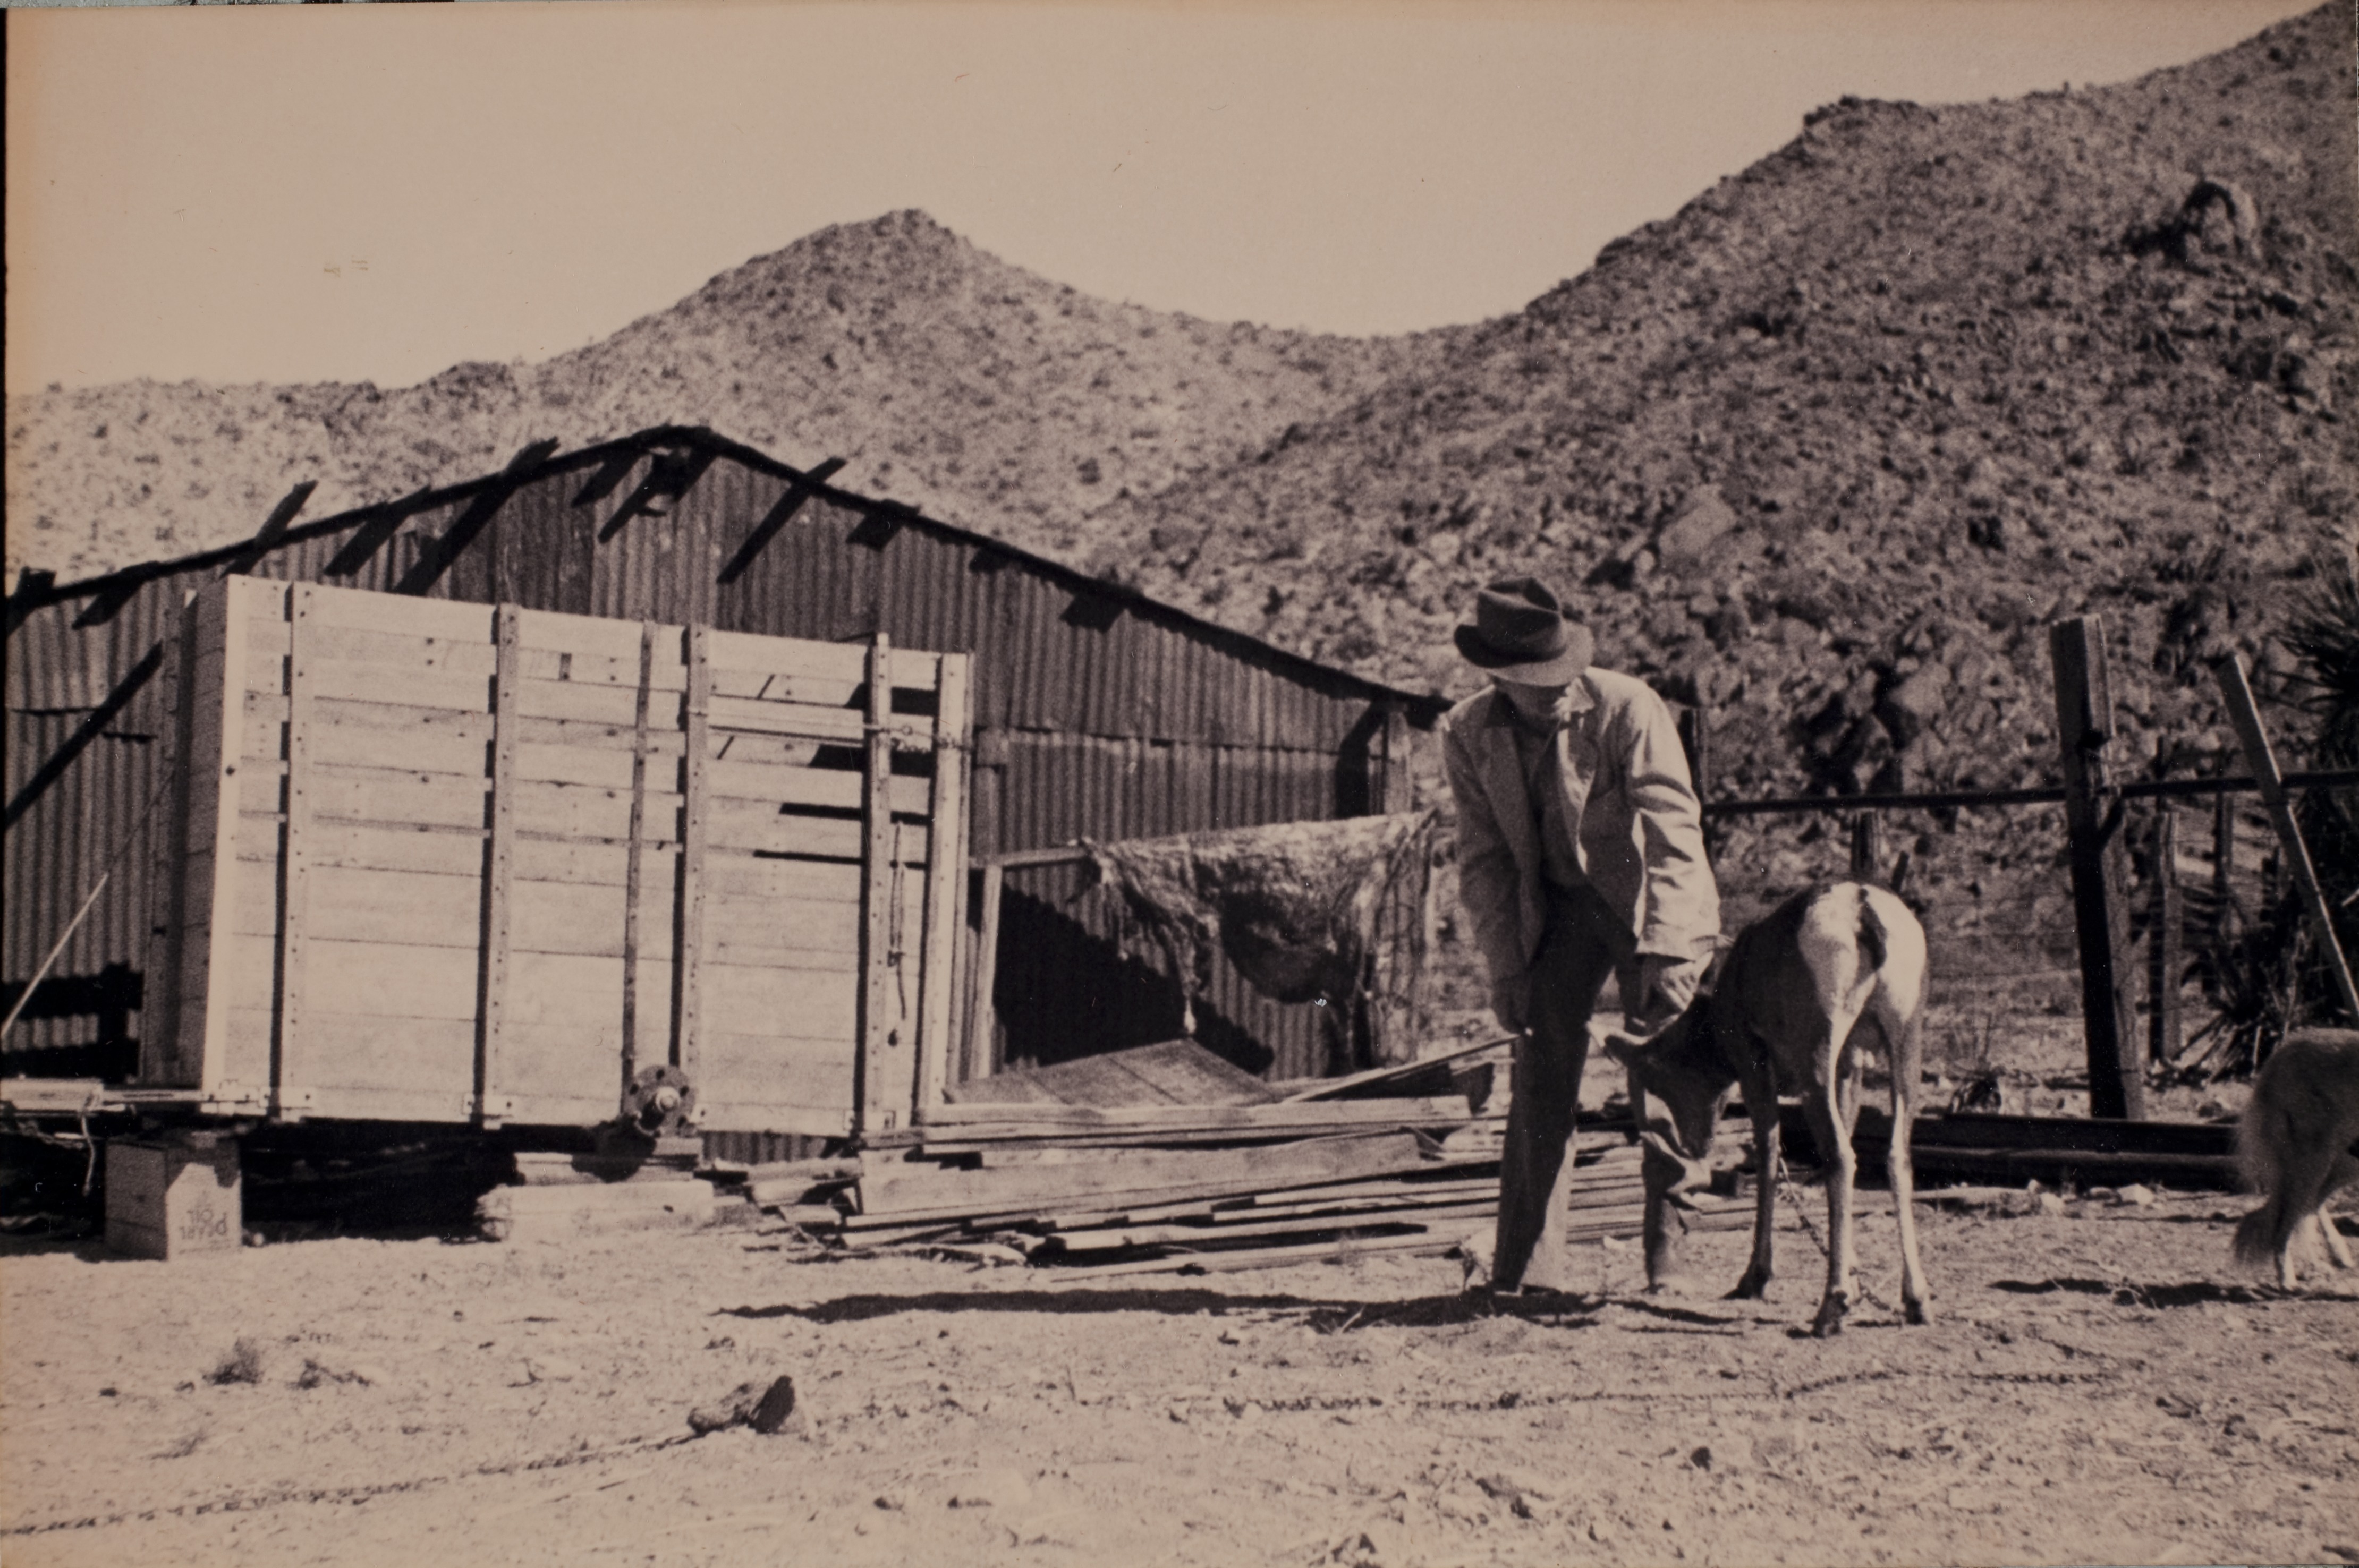 Billy the pet Bighorn sheep with an unidentified man.  Located in the Mojave desert, specific location unknown: photographic print